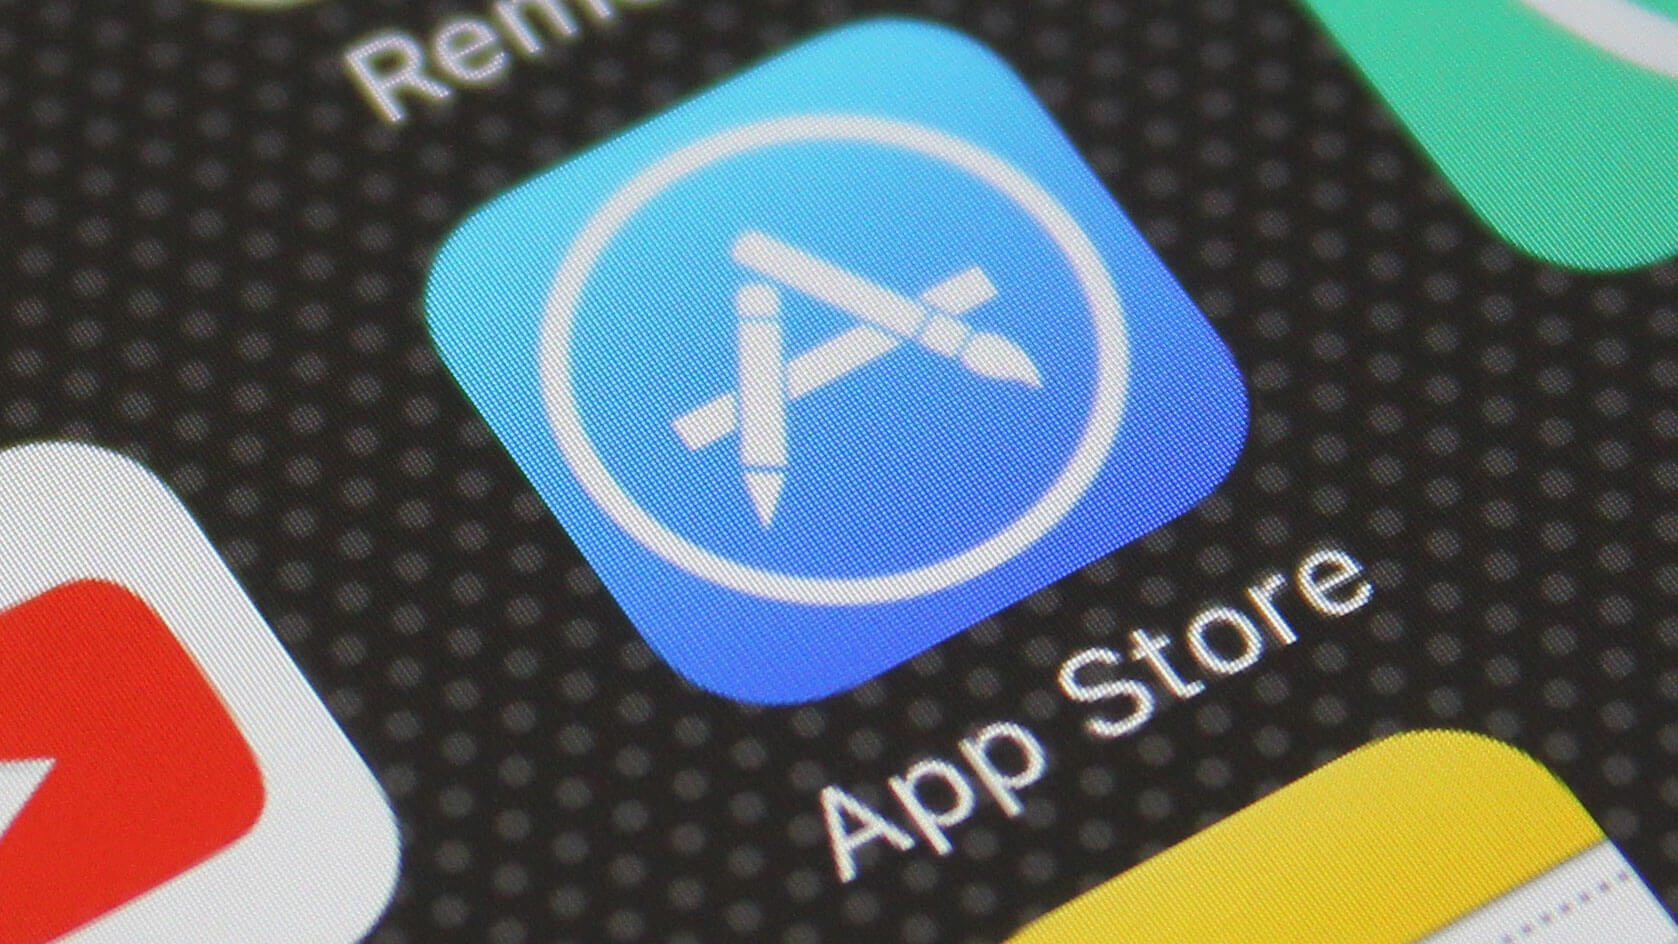 Apple's App Store is going to the Supreme Court for antitrust debate